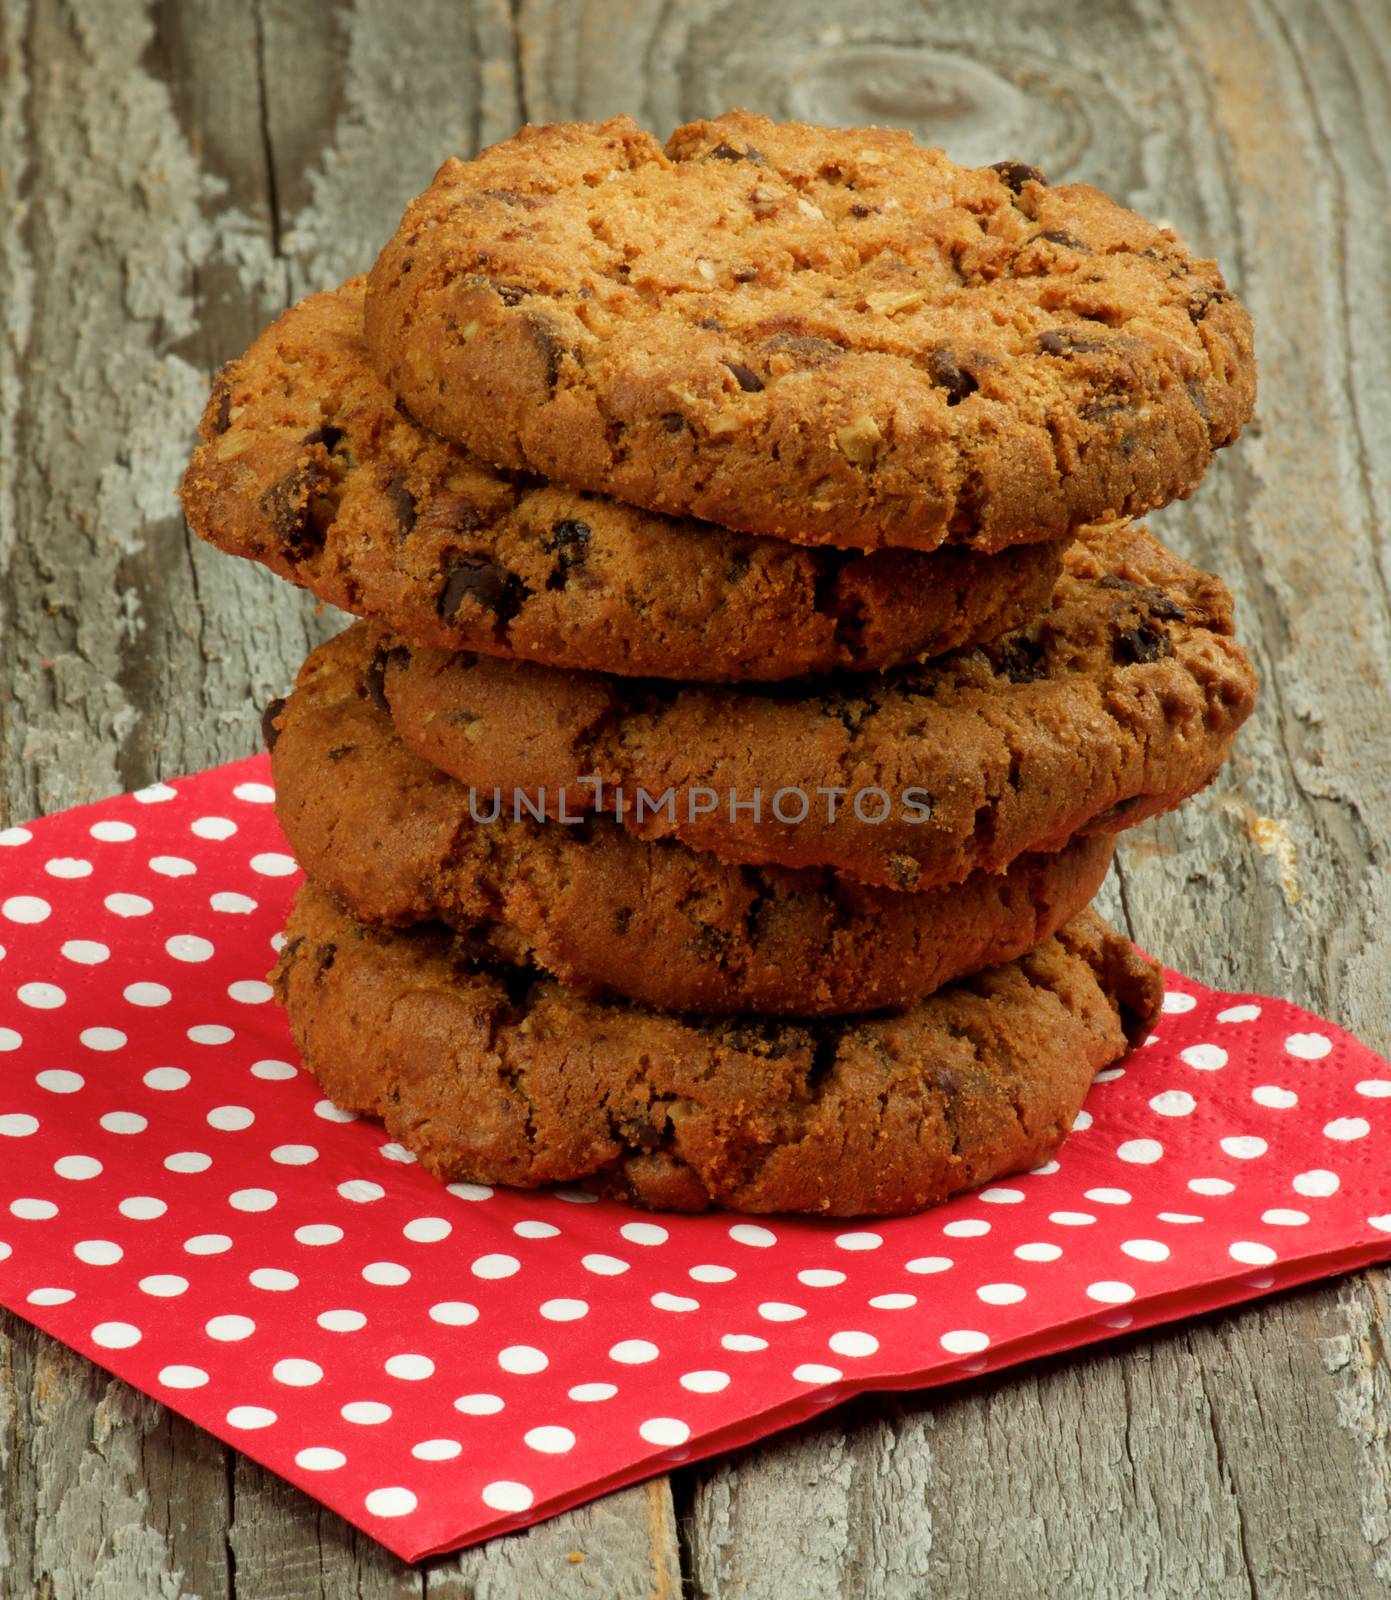 Stack of Chocolate Chip Cookies with Pieces of Nuts on Red Polka Dot Napkin closeup on Wooden background